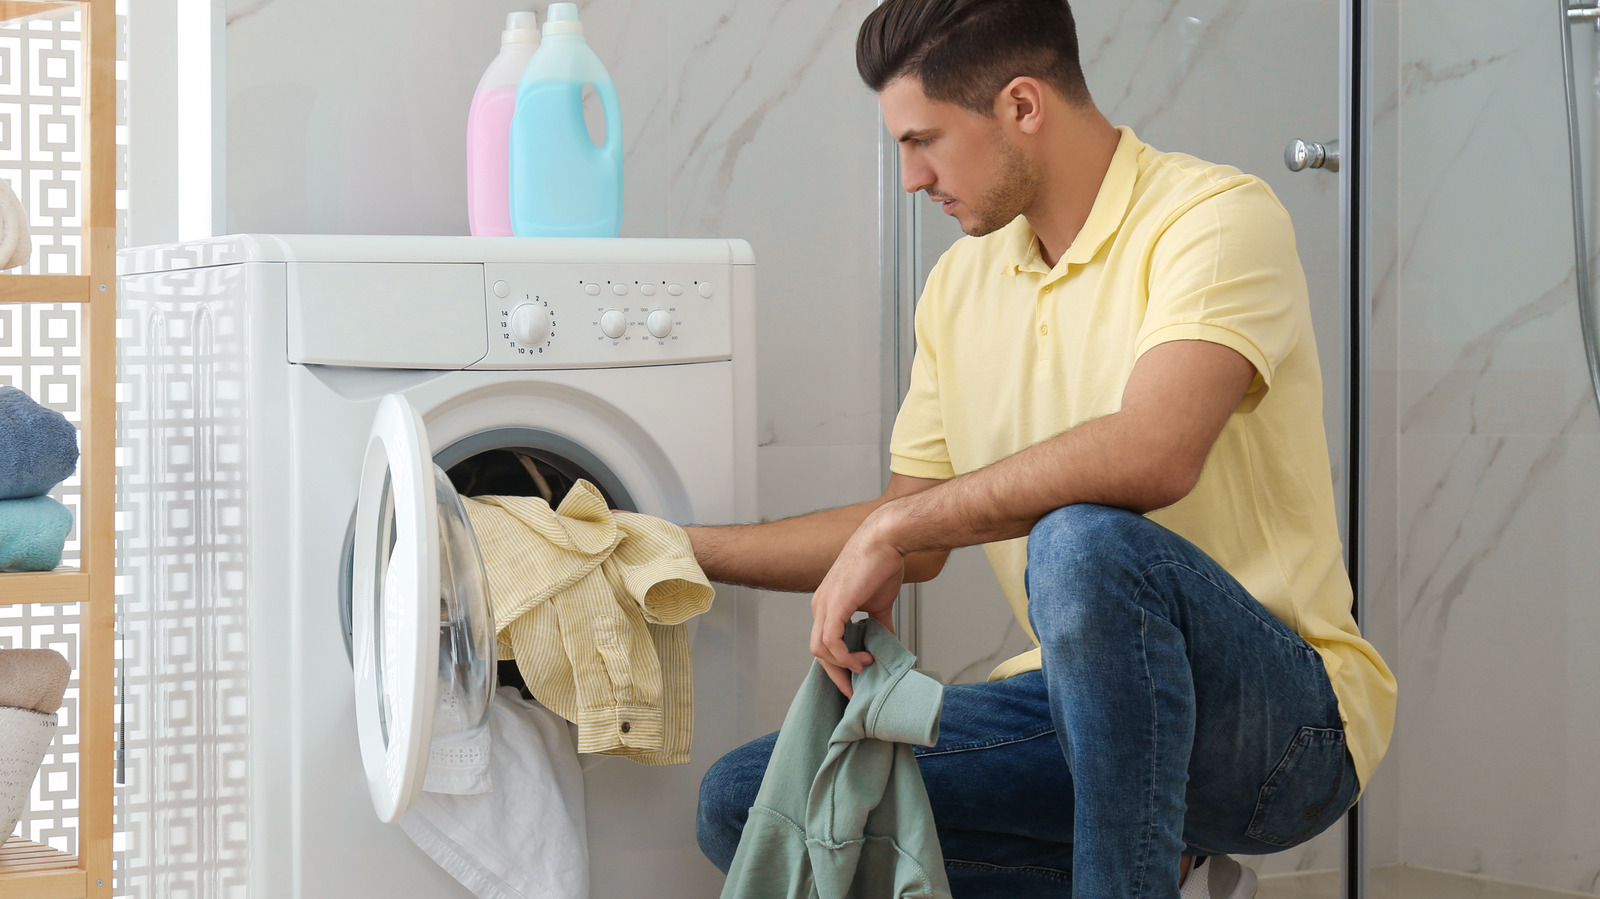 Do You Actually Need To Wash New Clothes?